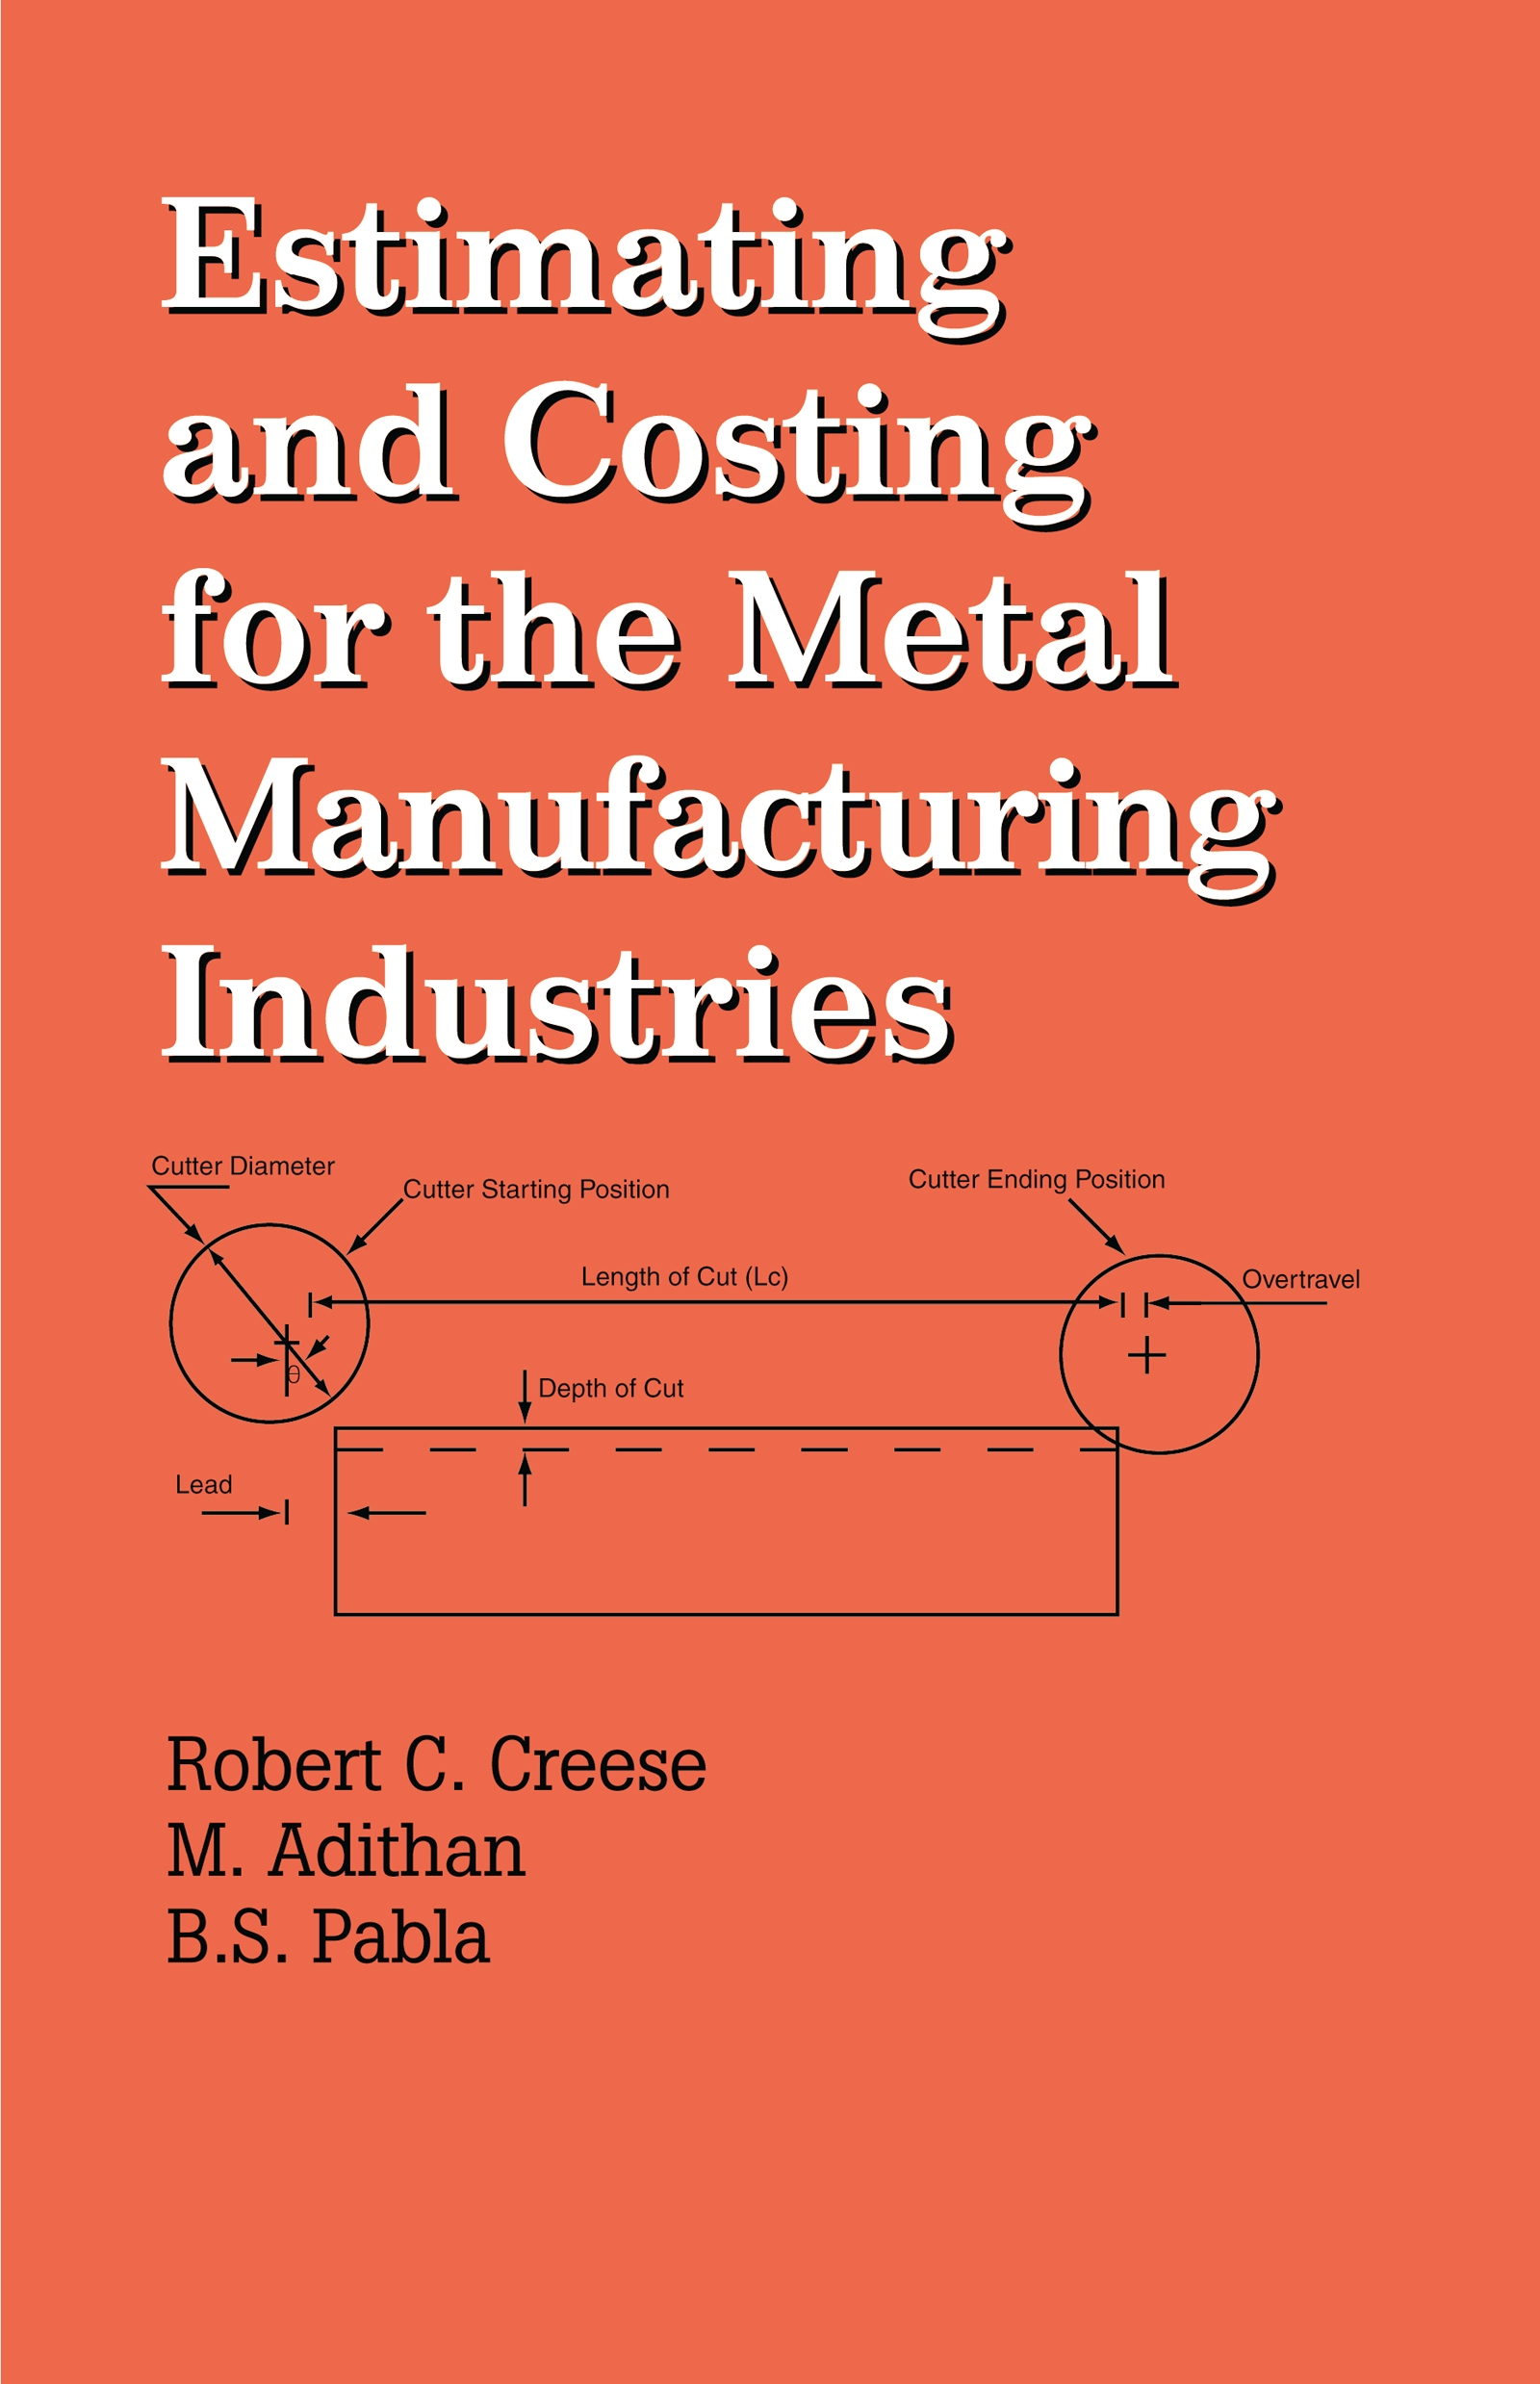 Estimating and Costing for the Metal Manufacturing Industries by Robert Creese and  M. Adithan Free PDF Book Download